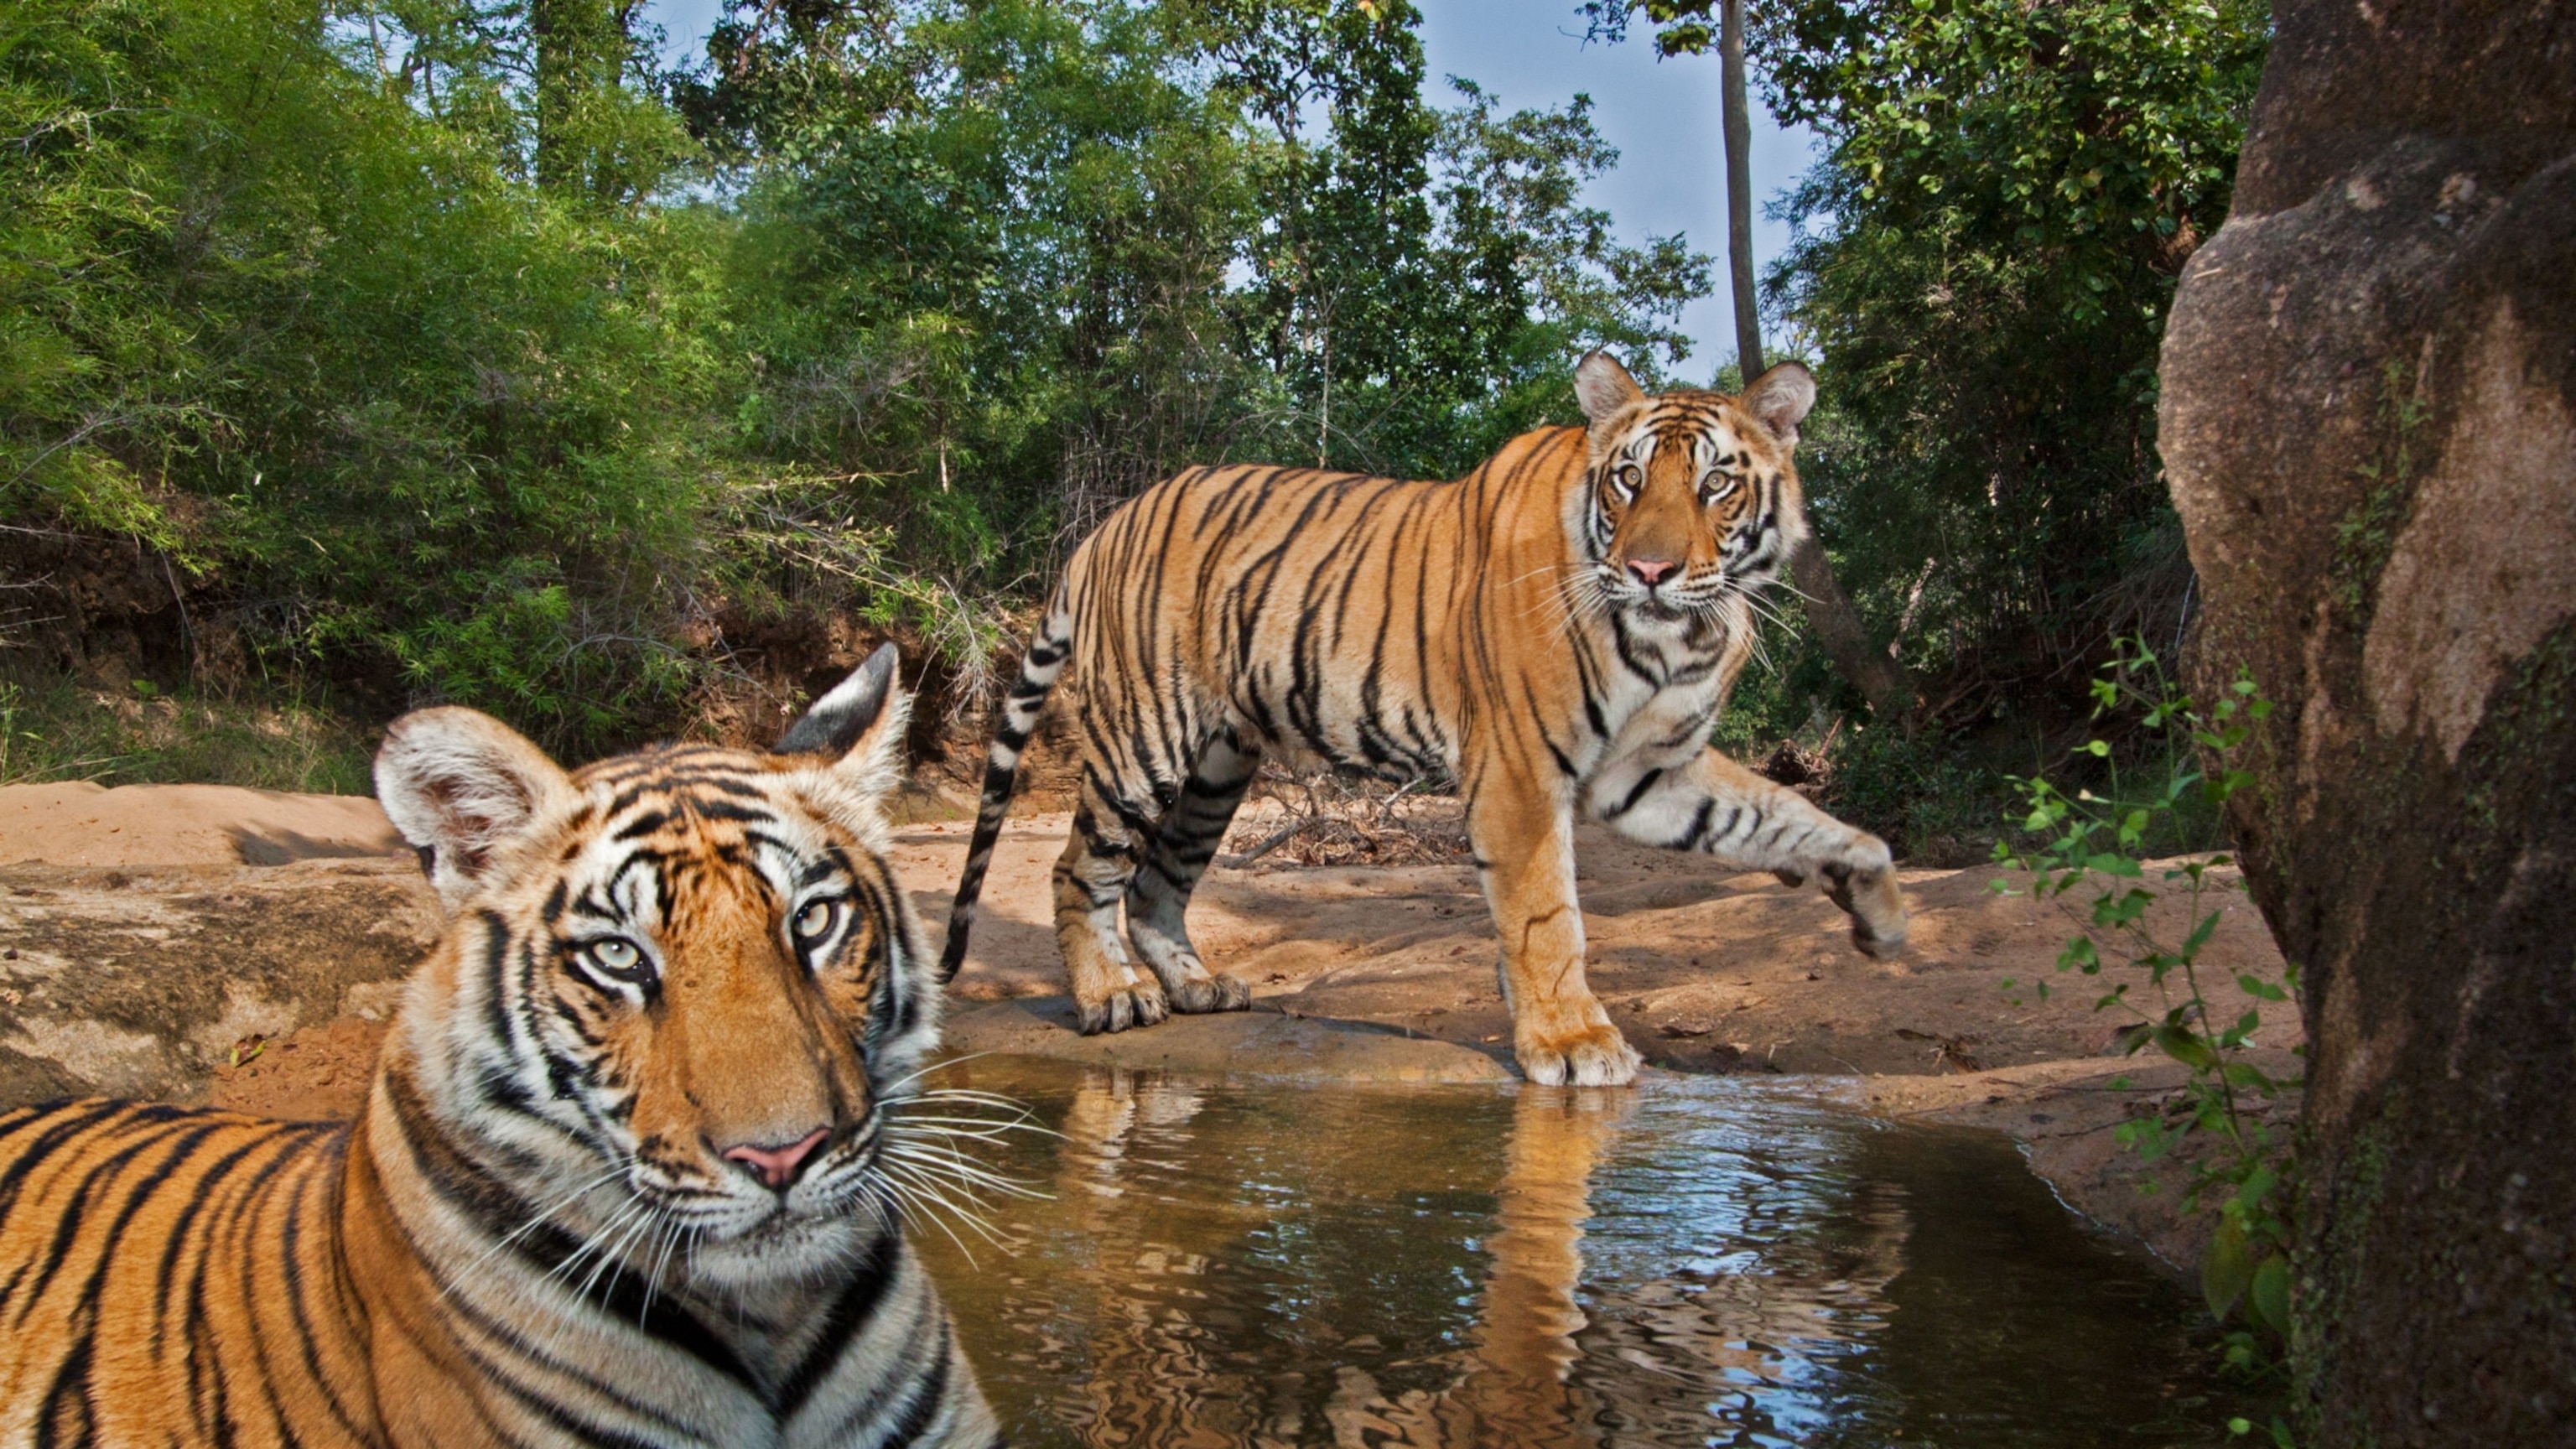 See some of Nat Geo's most striking photo of tigers—ever